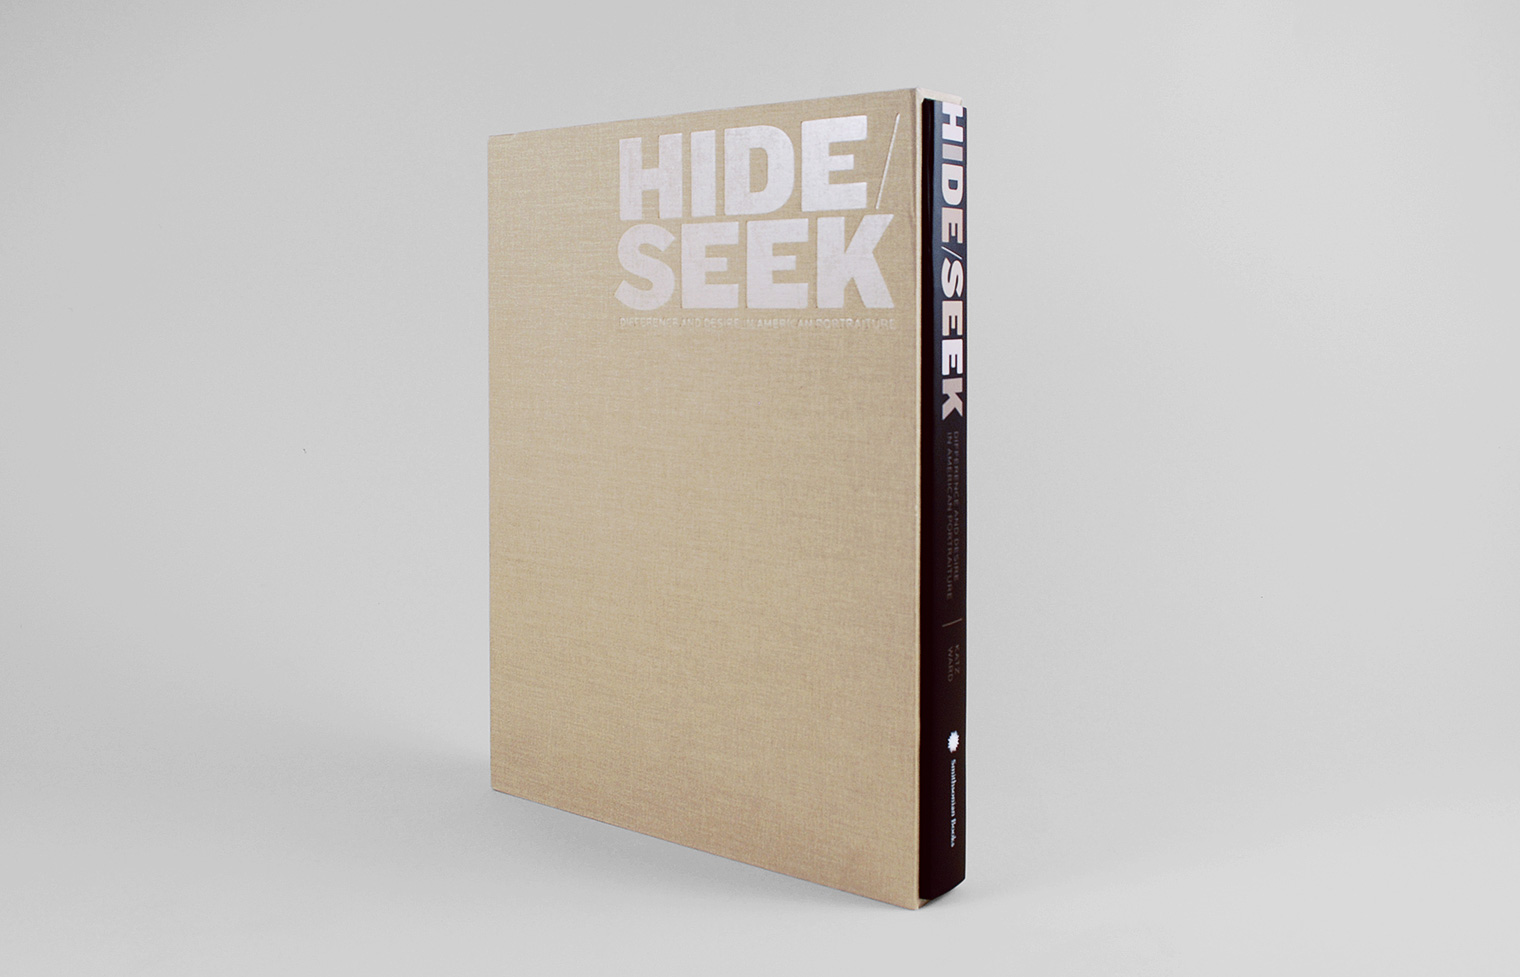 Special edition tan slipcase with title stamped with clear foil.